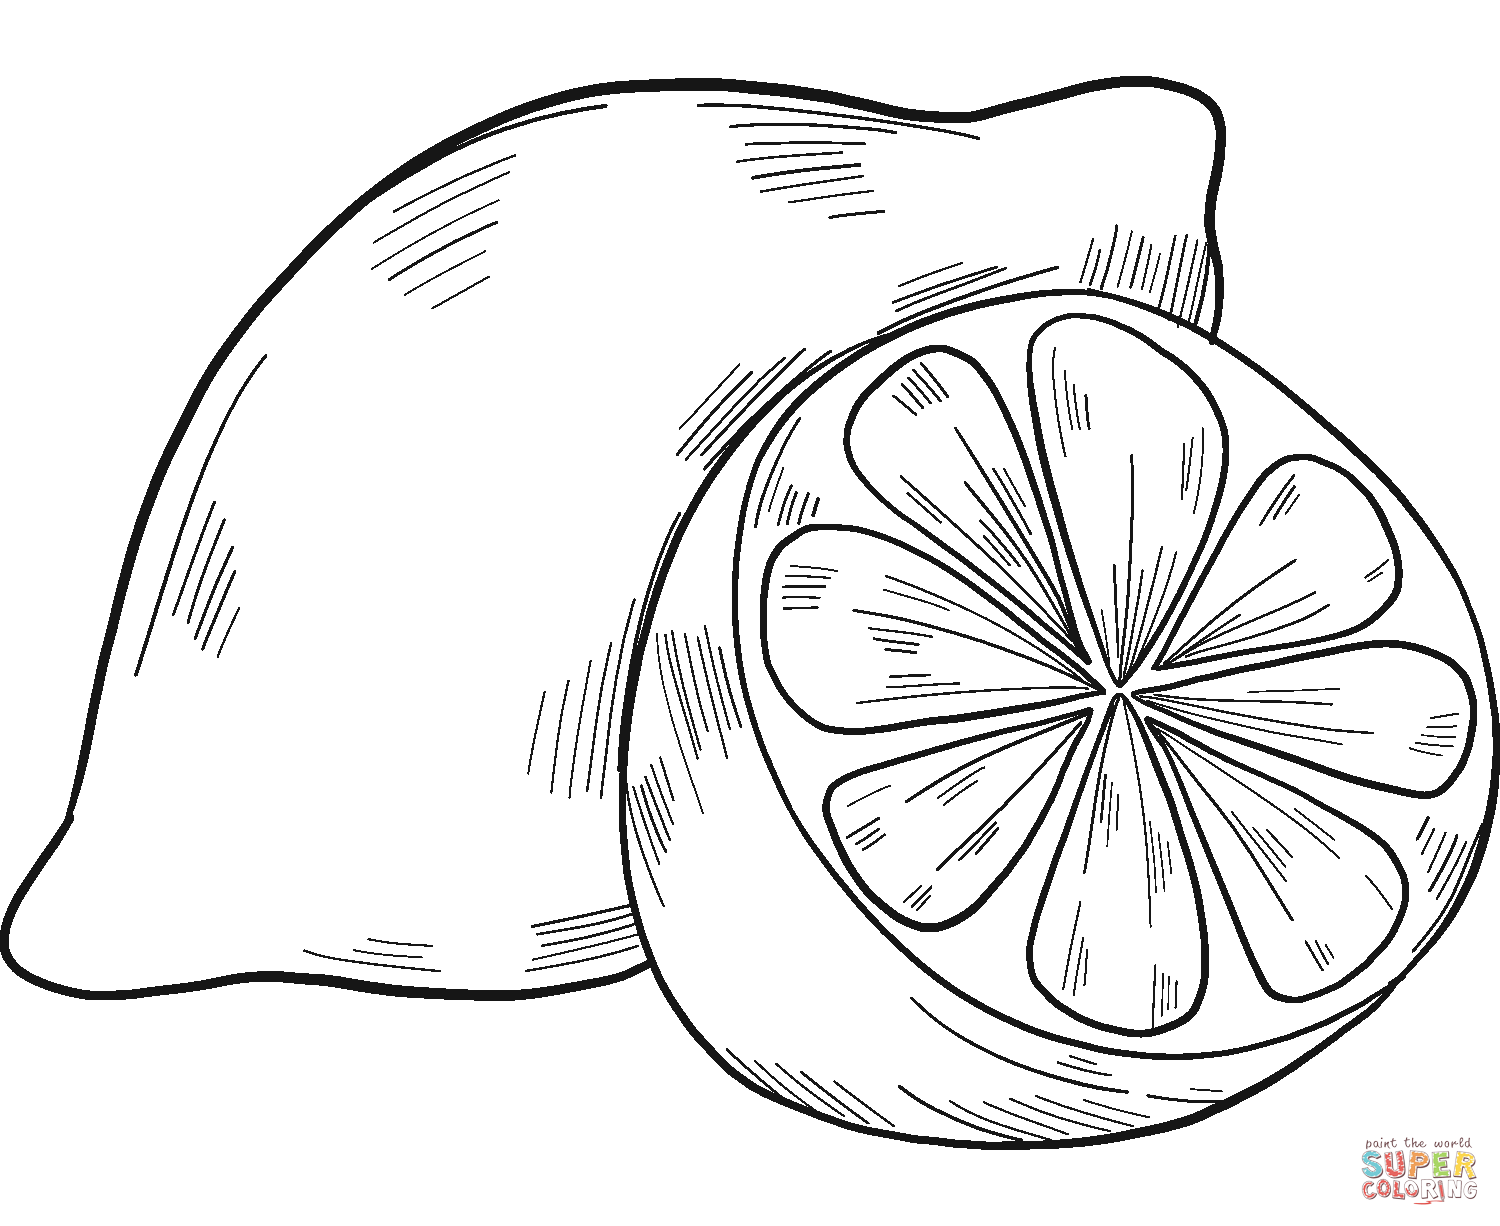 Lemons coloring page | Free Printable Coloring Pages